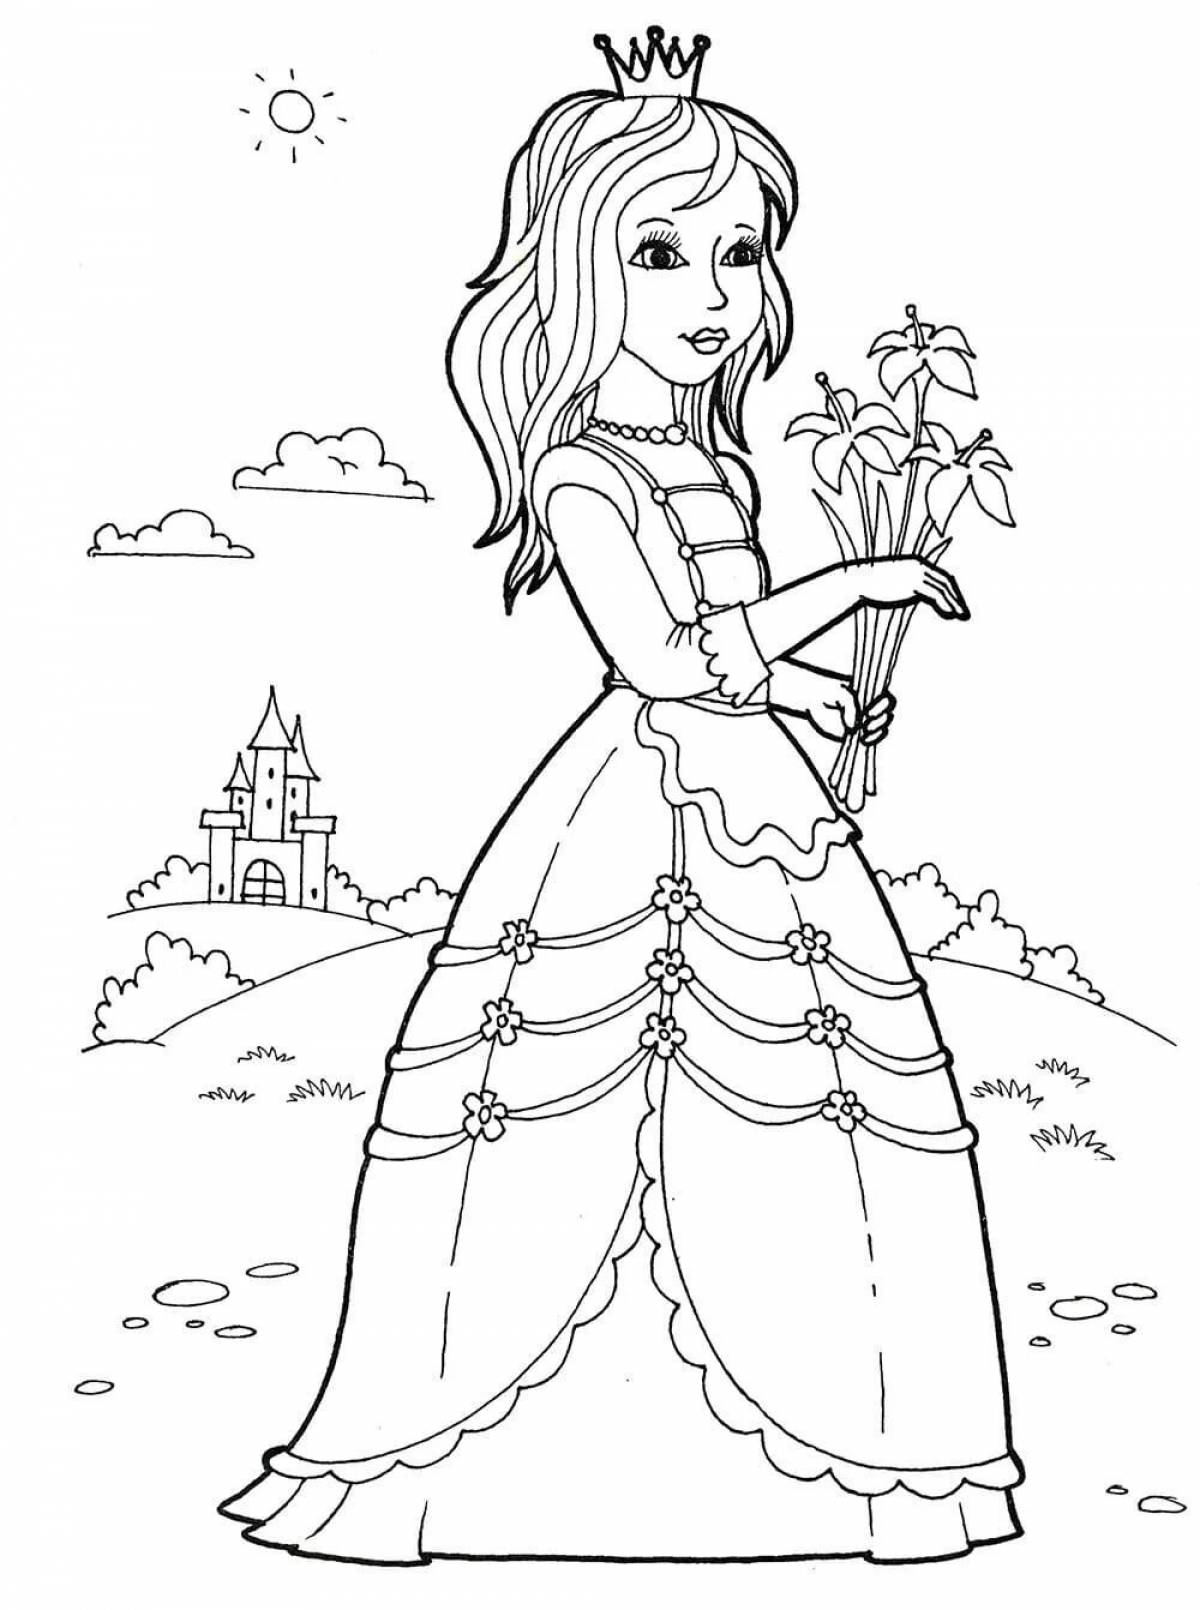 Grand coloring page 6 for girls